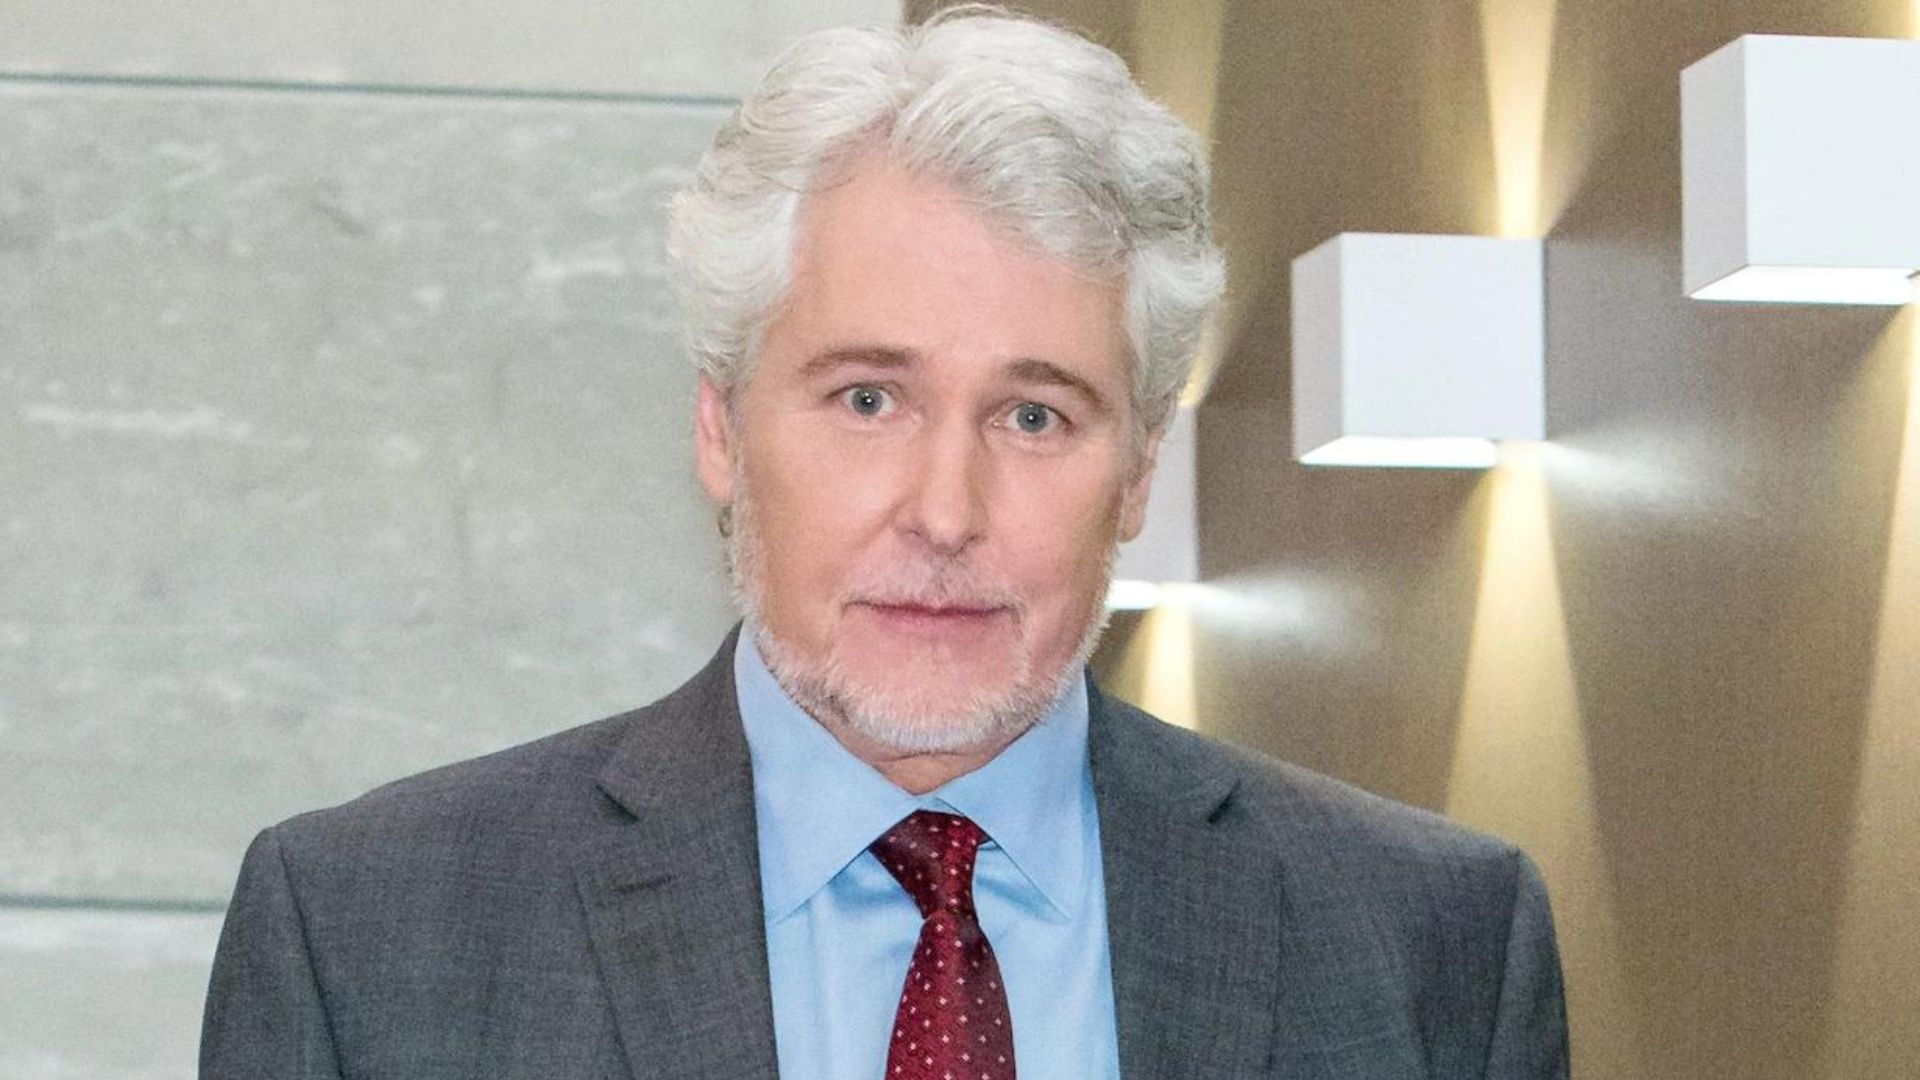 Michael E. Knight's Weight Loss And Health Problems